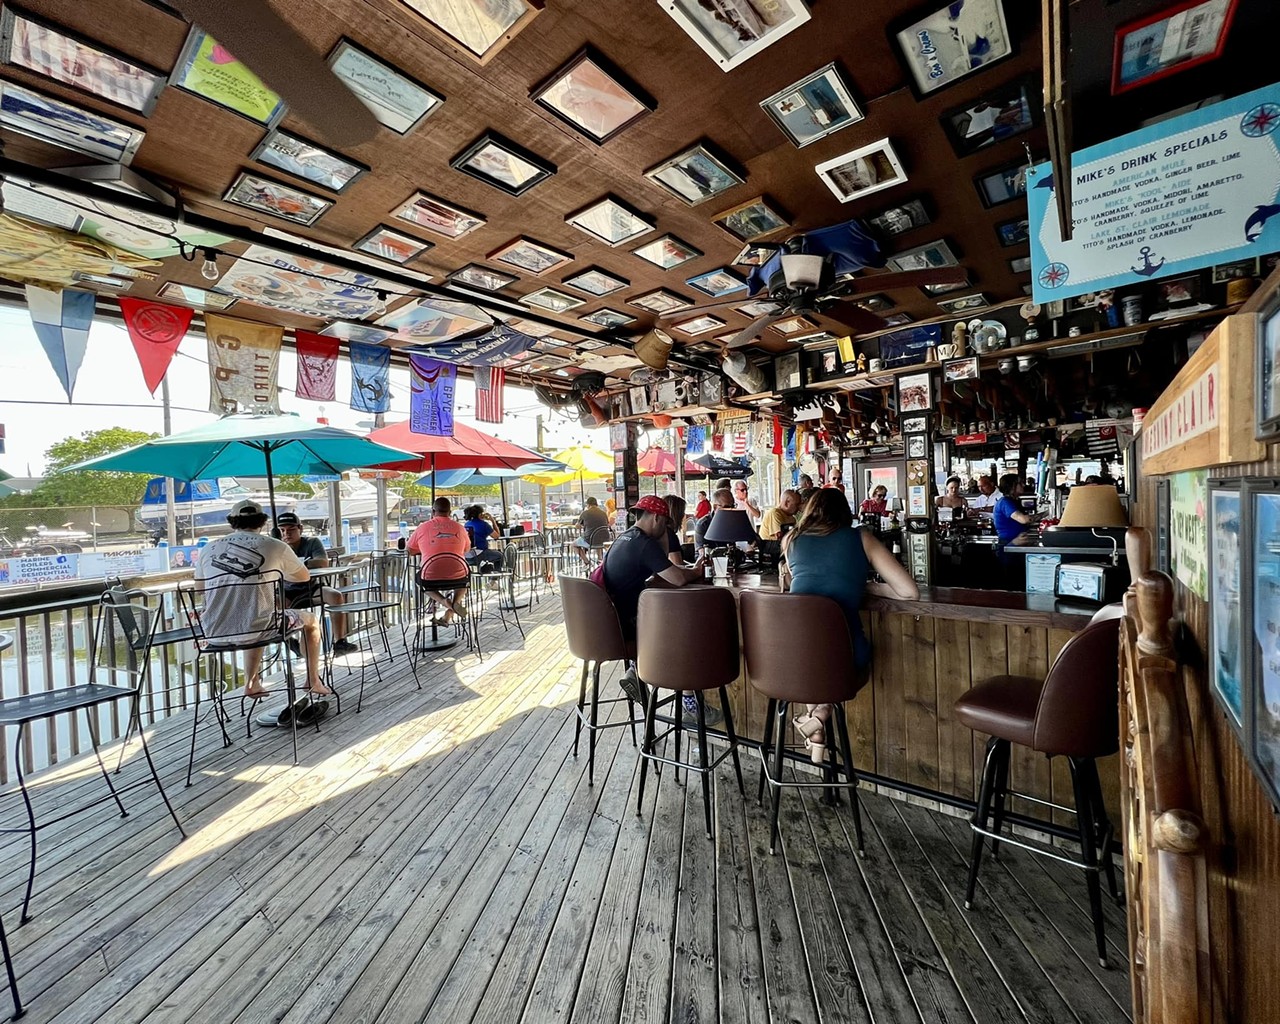 Mike’s on the Water
24600 Jefferson Ave., St. Clair Shores; 586-872-2630; mikesonthewater.com
This waterfront bar boasts beautiful views of Lake St. Clair. It takes its nautical theme to the next level — see the “wall of beards.”